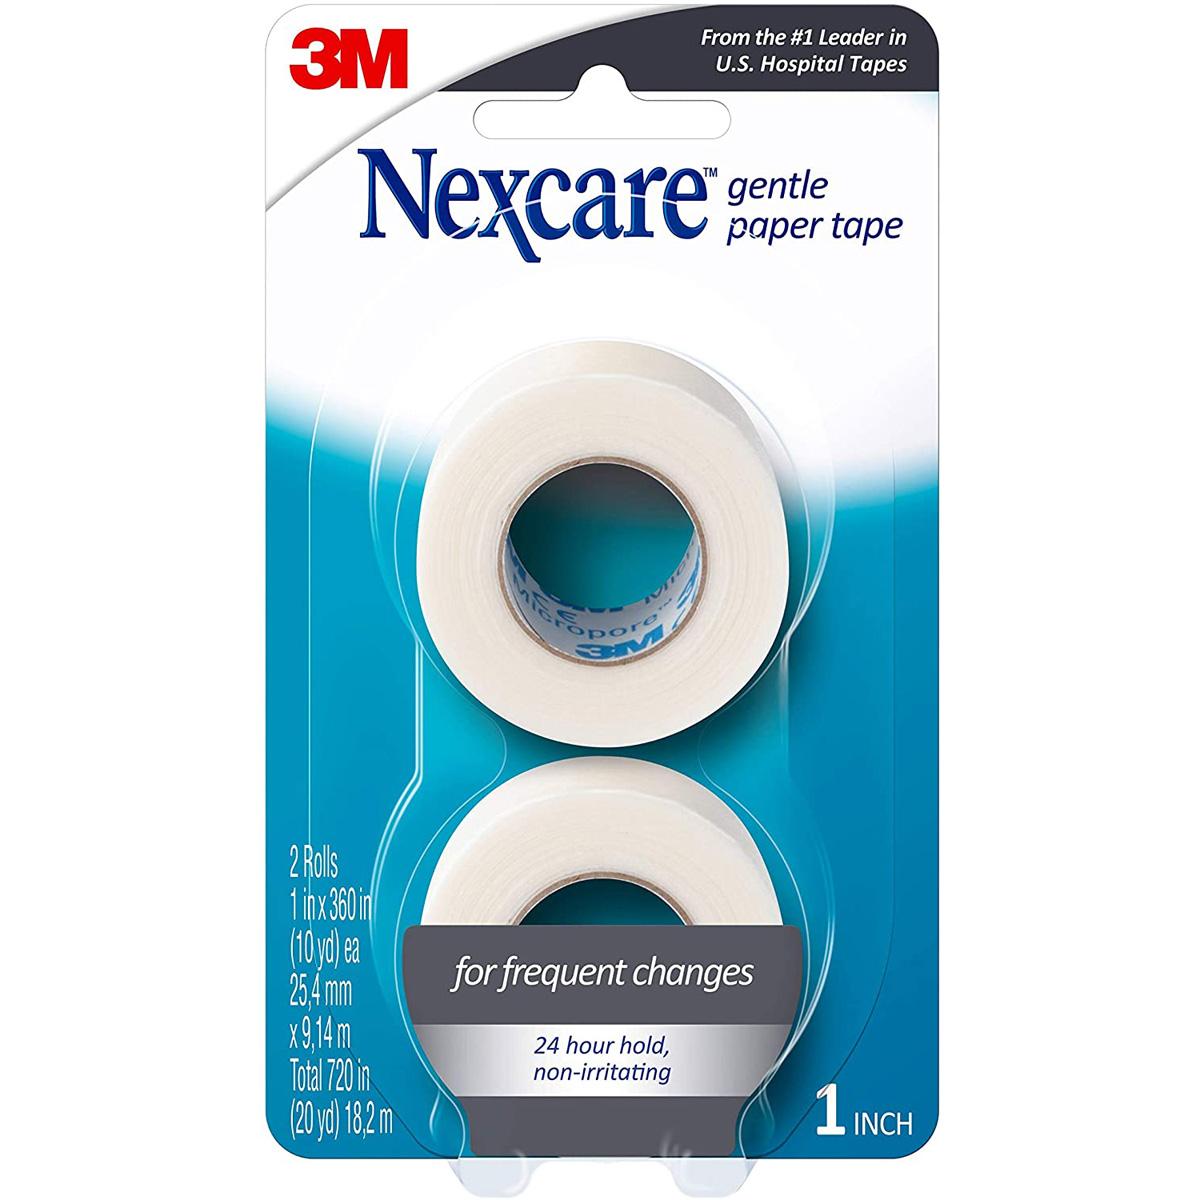 2 Nexcare Gentle Paper First Aid Tapes for $1.95